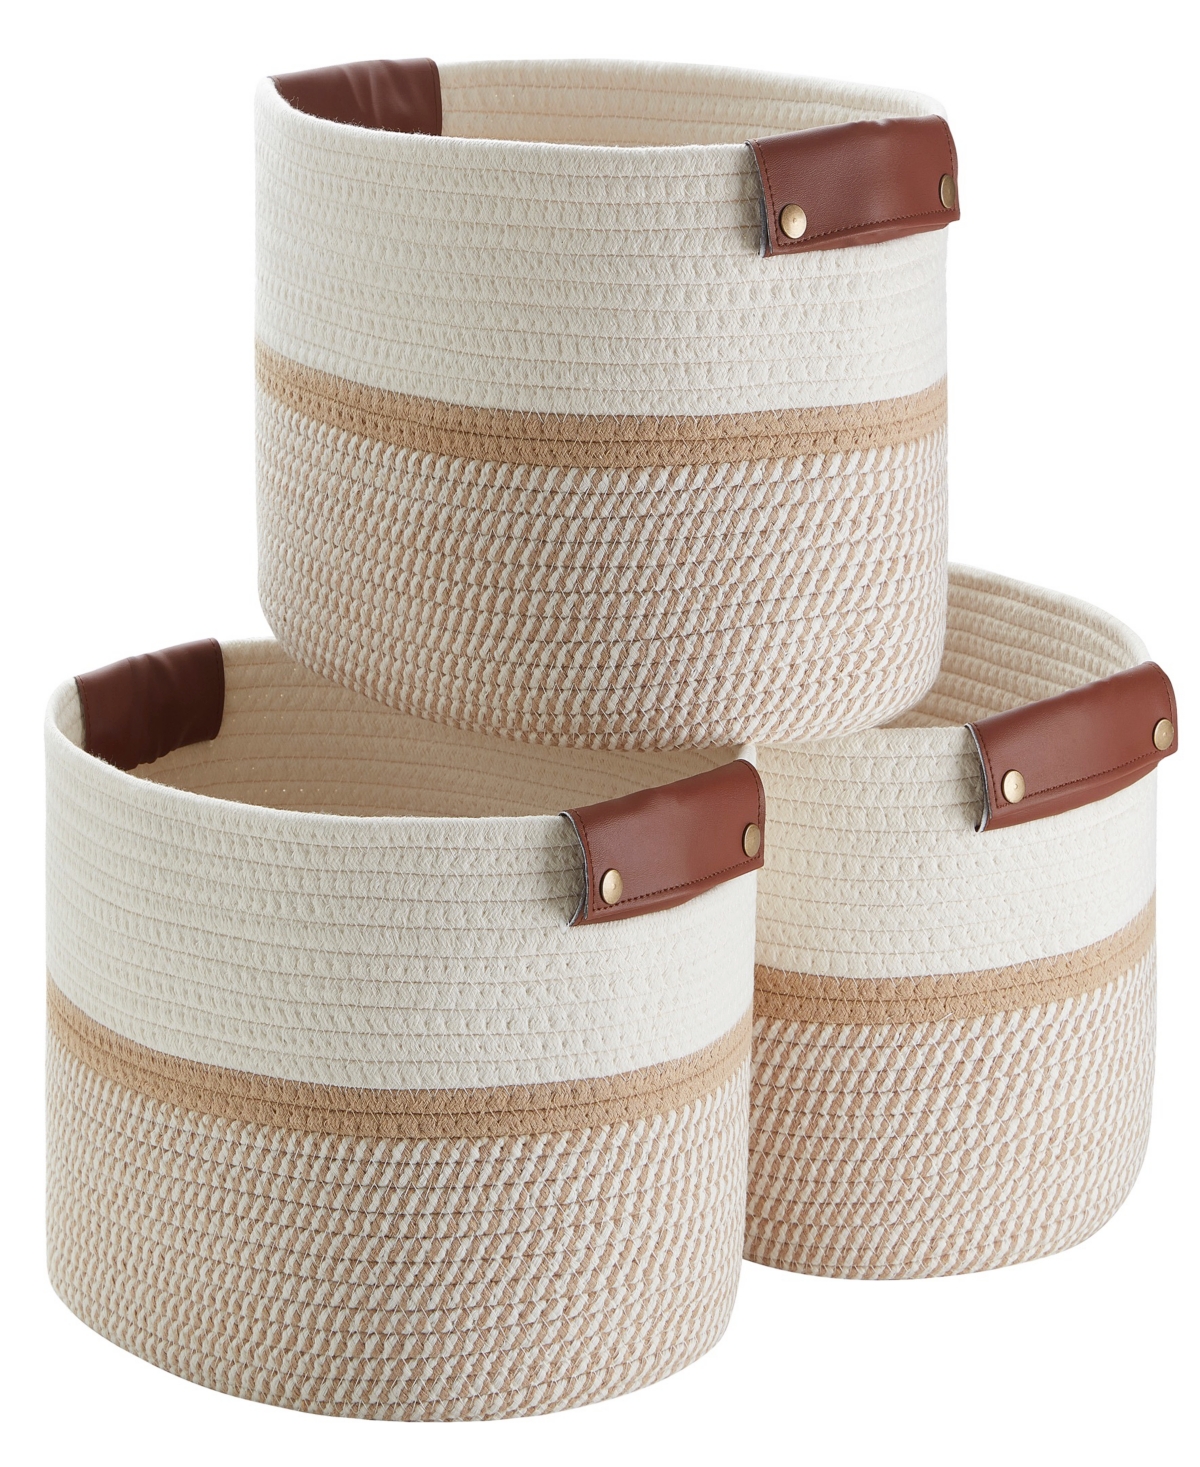 Ornavo Home 3 Pack Woven Cotton Rope Shelf Storage Basket With Leather Handles In White,brown